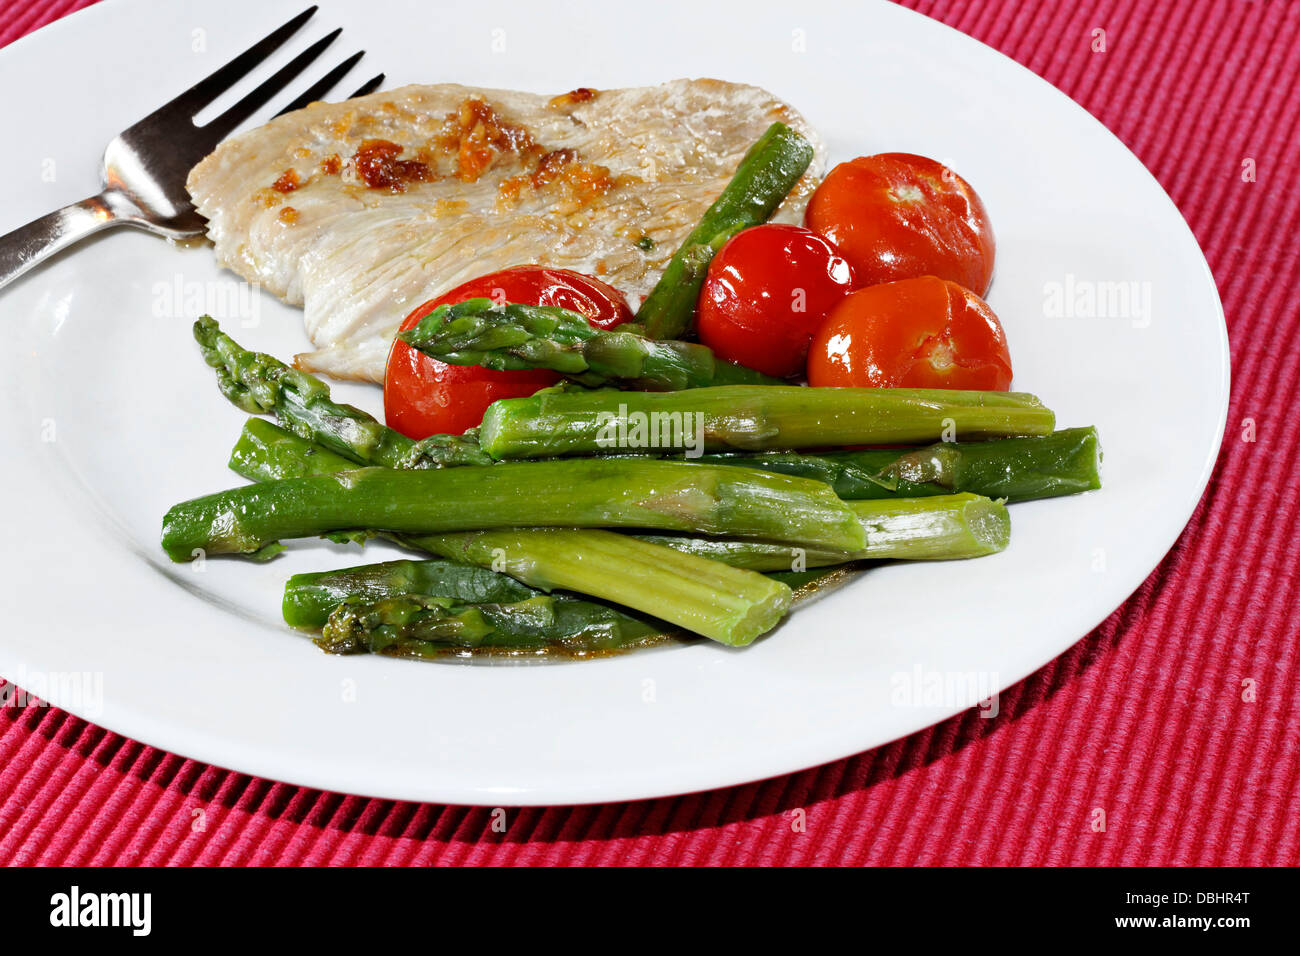 Turkey Steak, Green Asparagus and Tomatoes on white plate Stock Photo